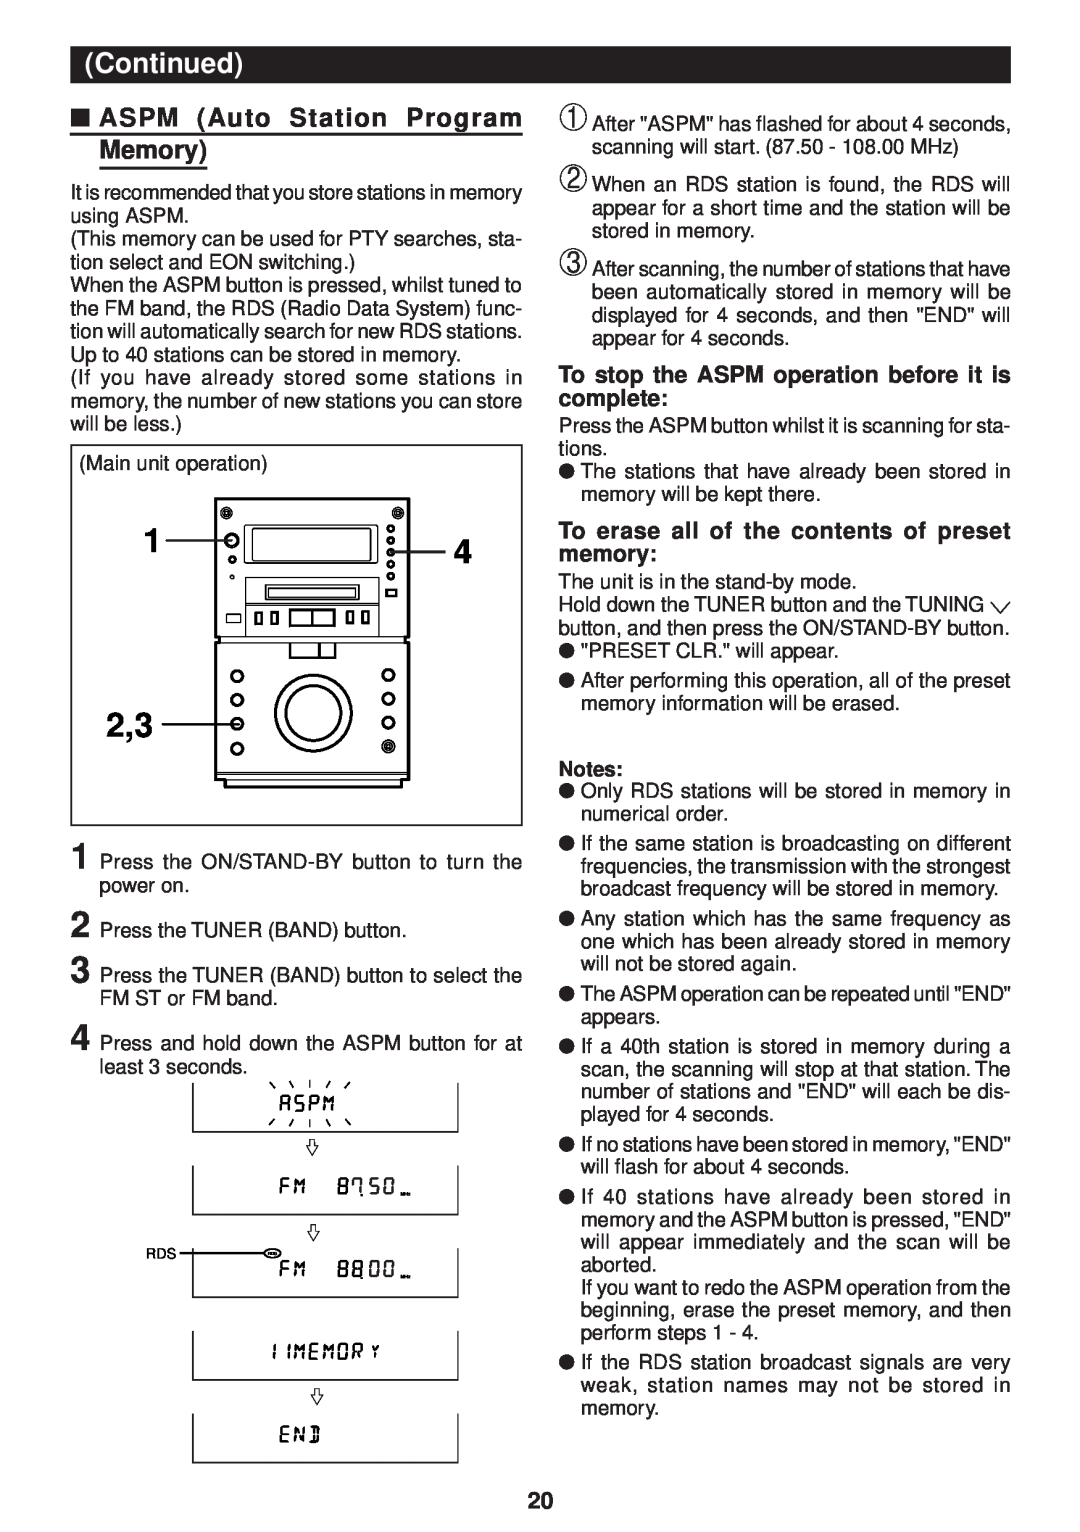 Sharp MD-M3H operation manual ASPM Auto Station ProgramMemory, To stop the ASPM operation before it is complete, Continued 